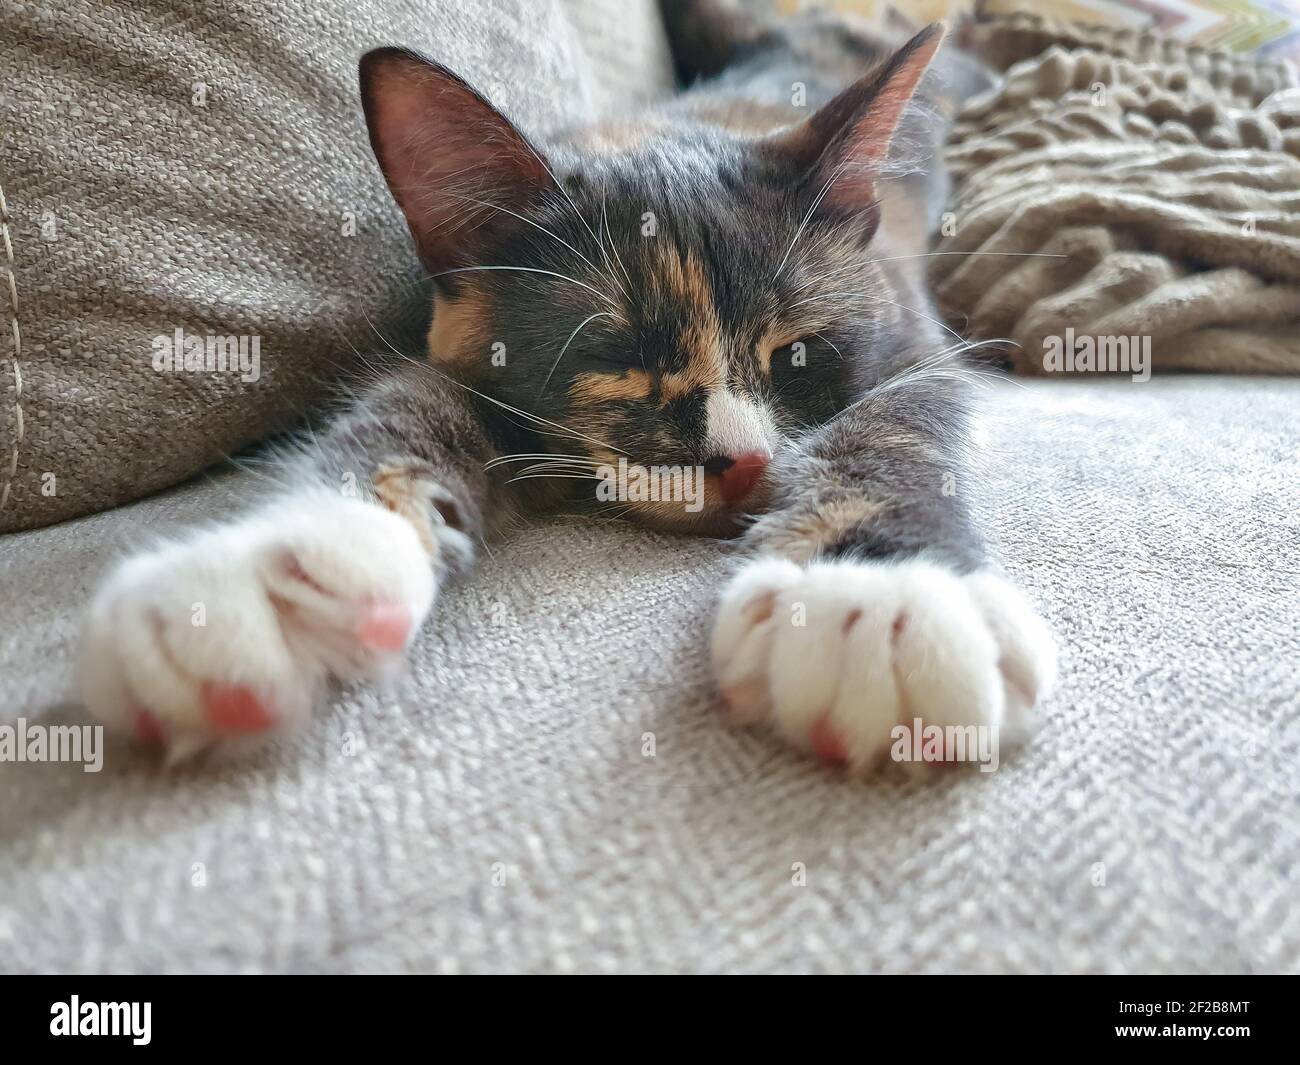 Tricolor cat is sleeping with its white paws outstretched, a gray kitten sleeps on the couch Stock Photo